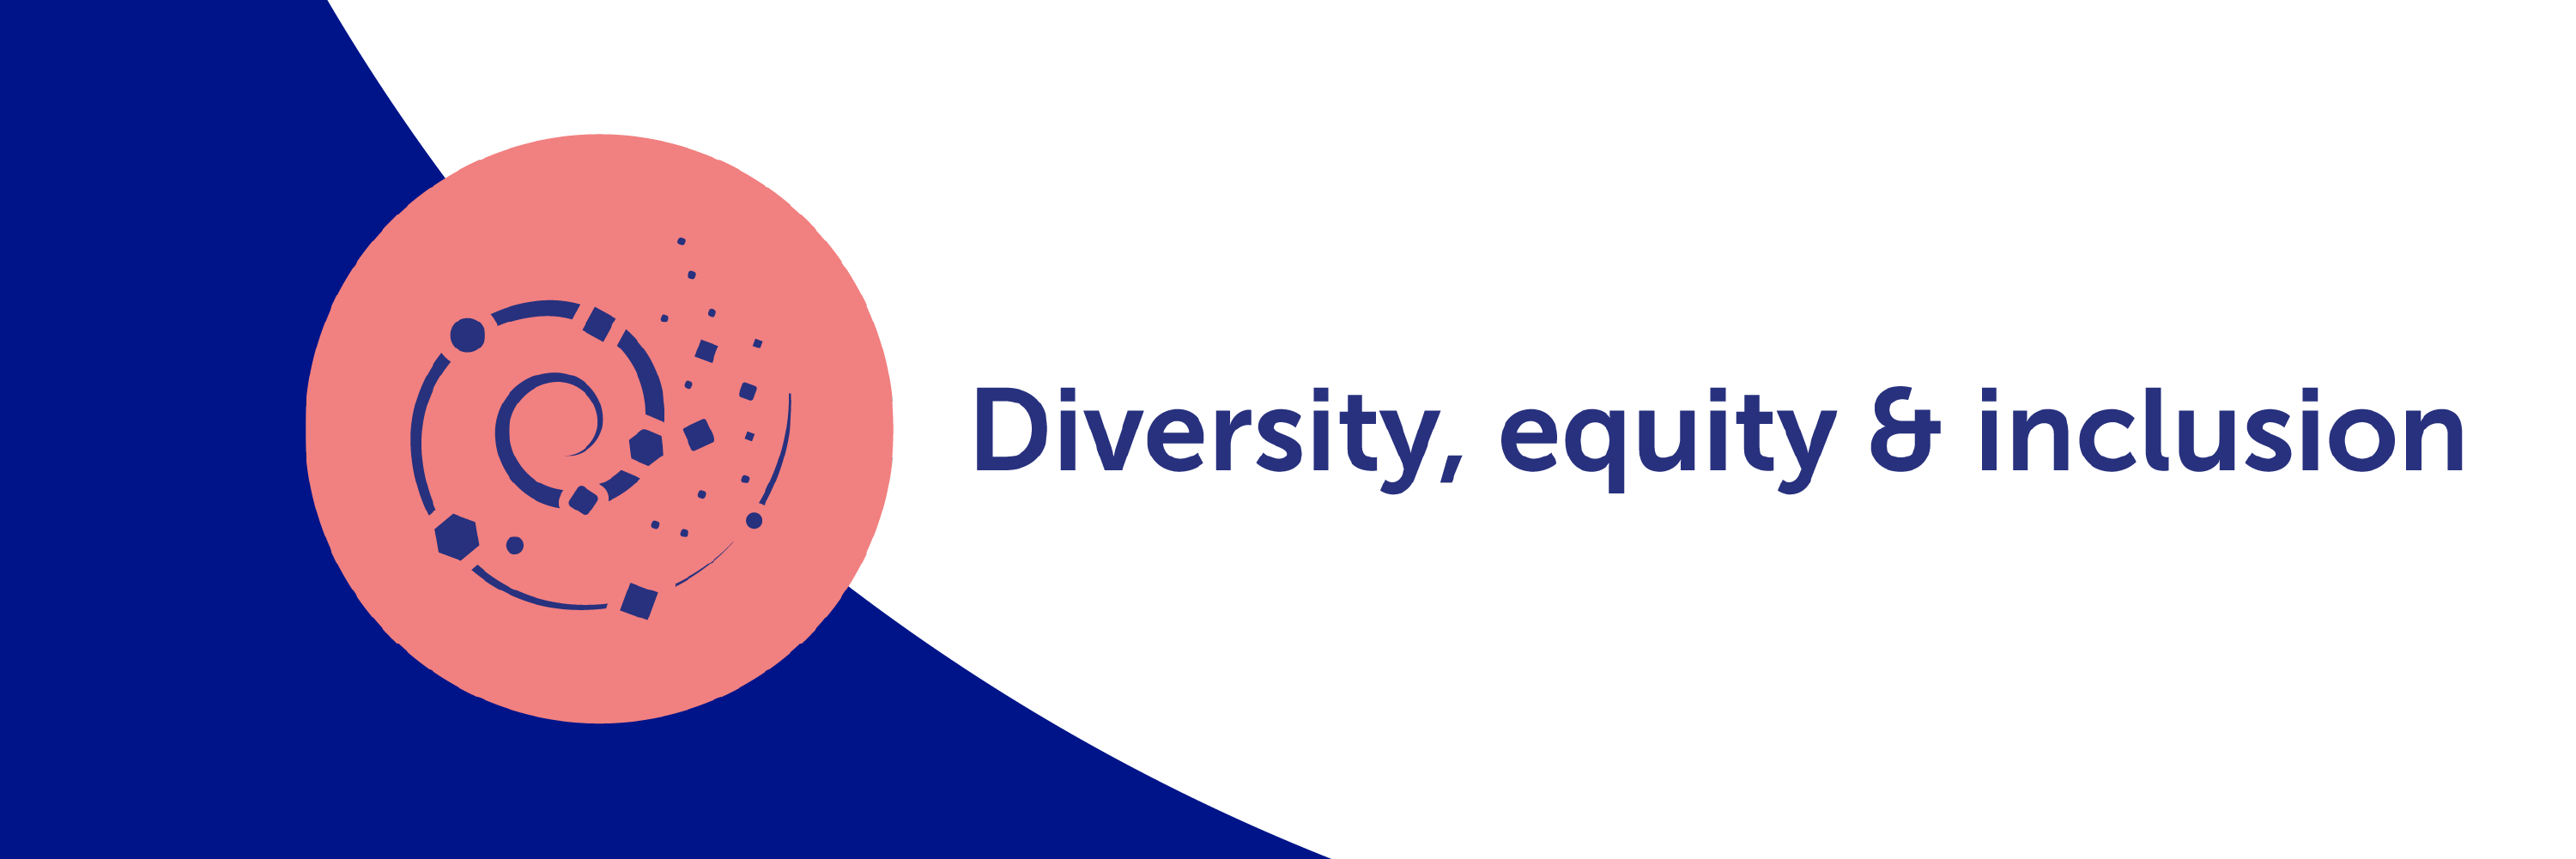 Diversity, equity and inclusion 